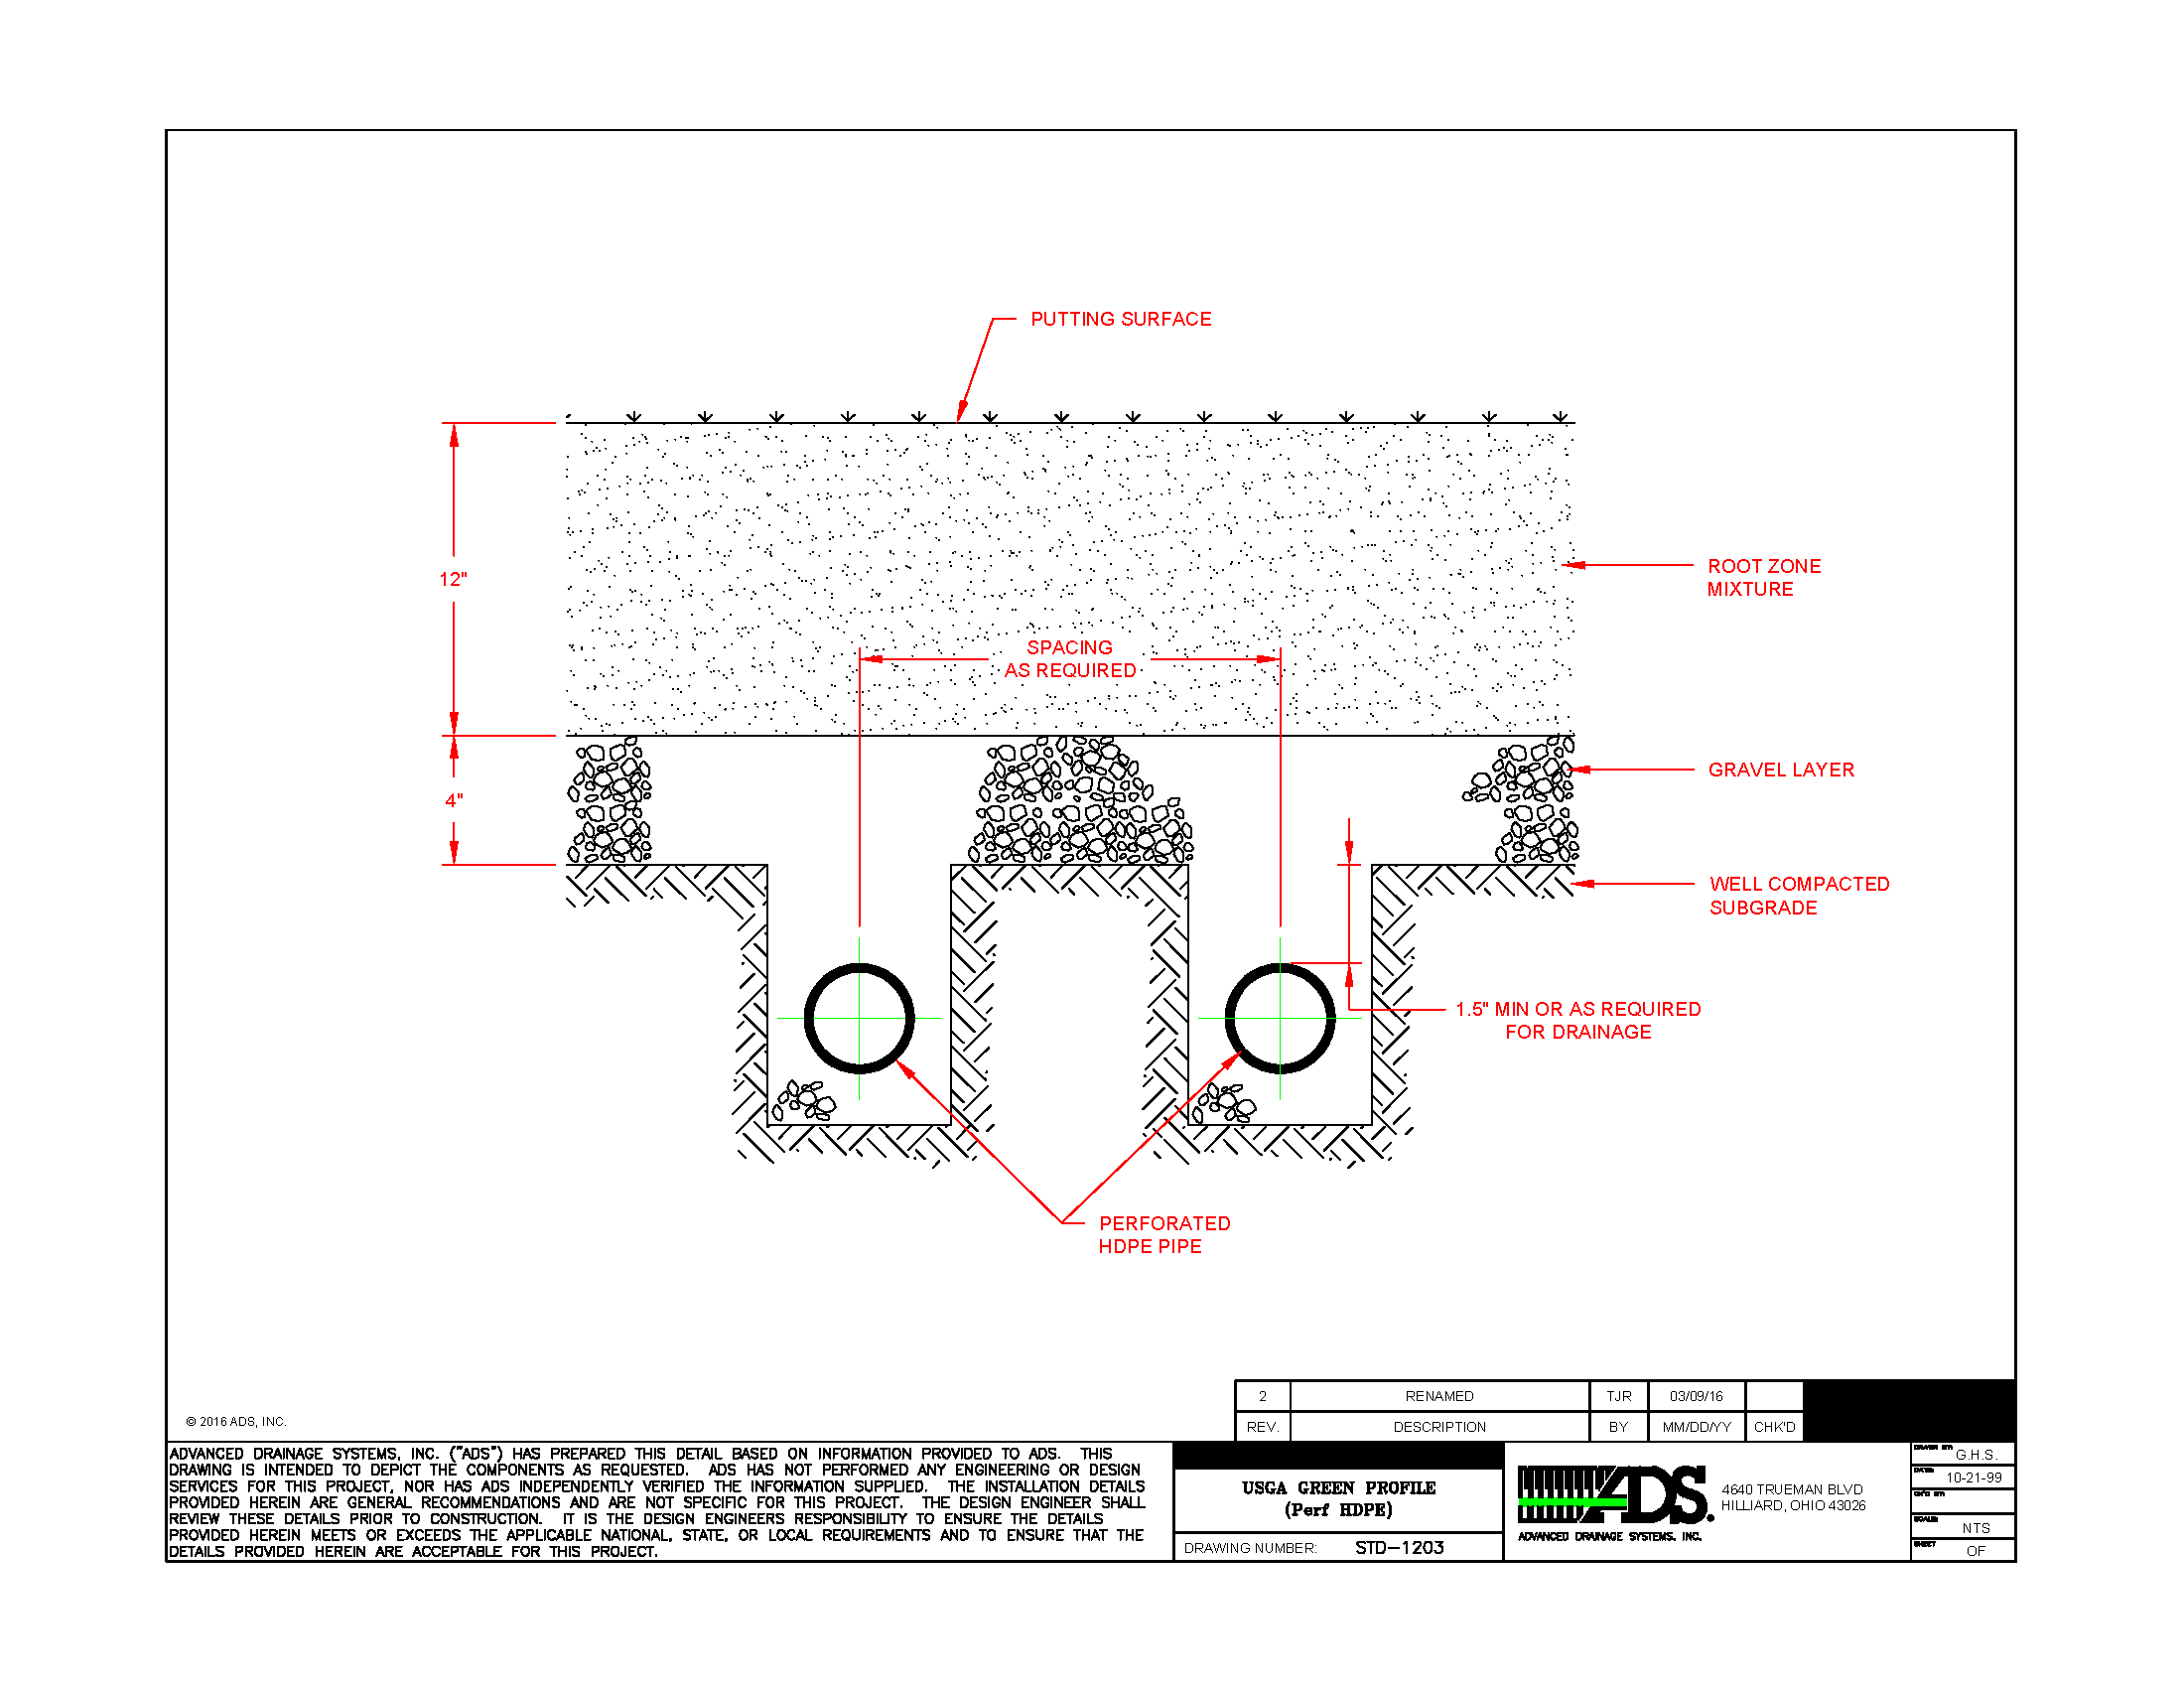 Sanitary Sewer Design Spreadsheet Pertaining To Drainage Engineering Resources  Advanced Drainage Systems